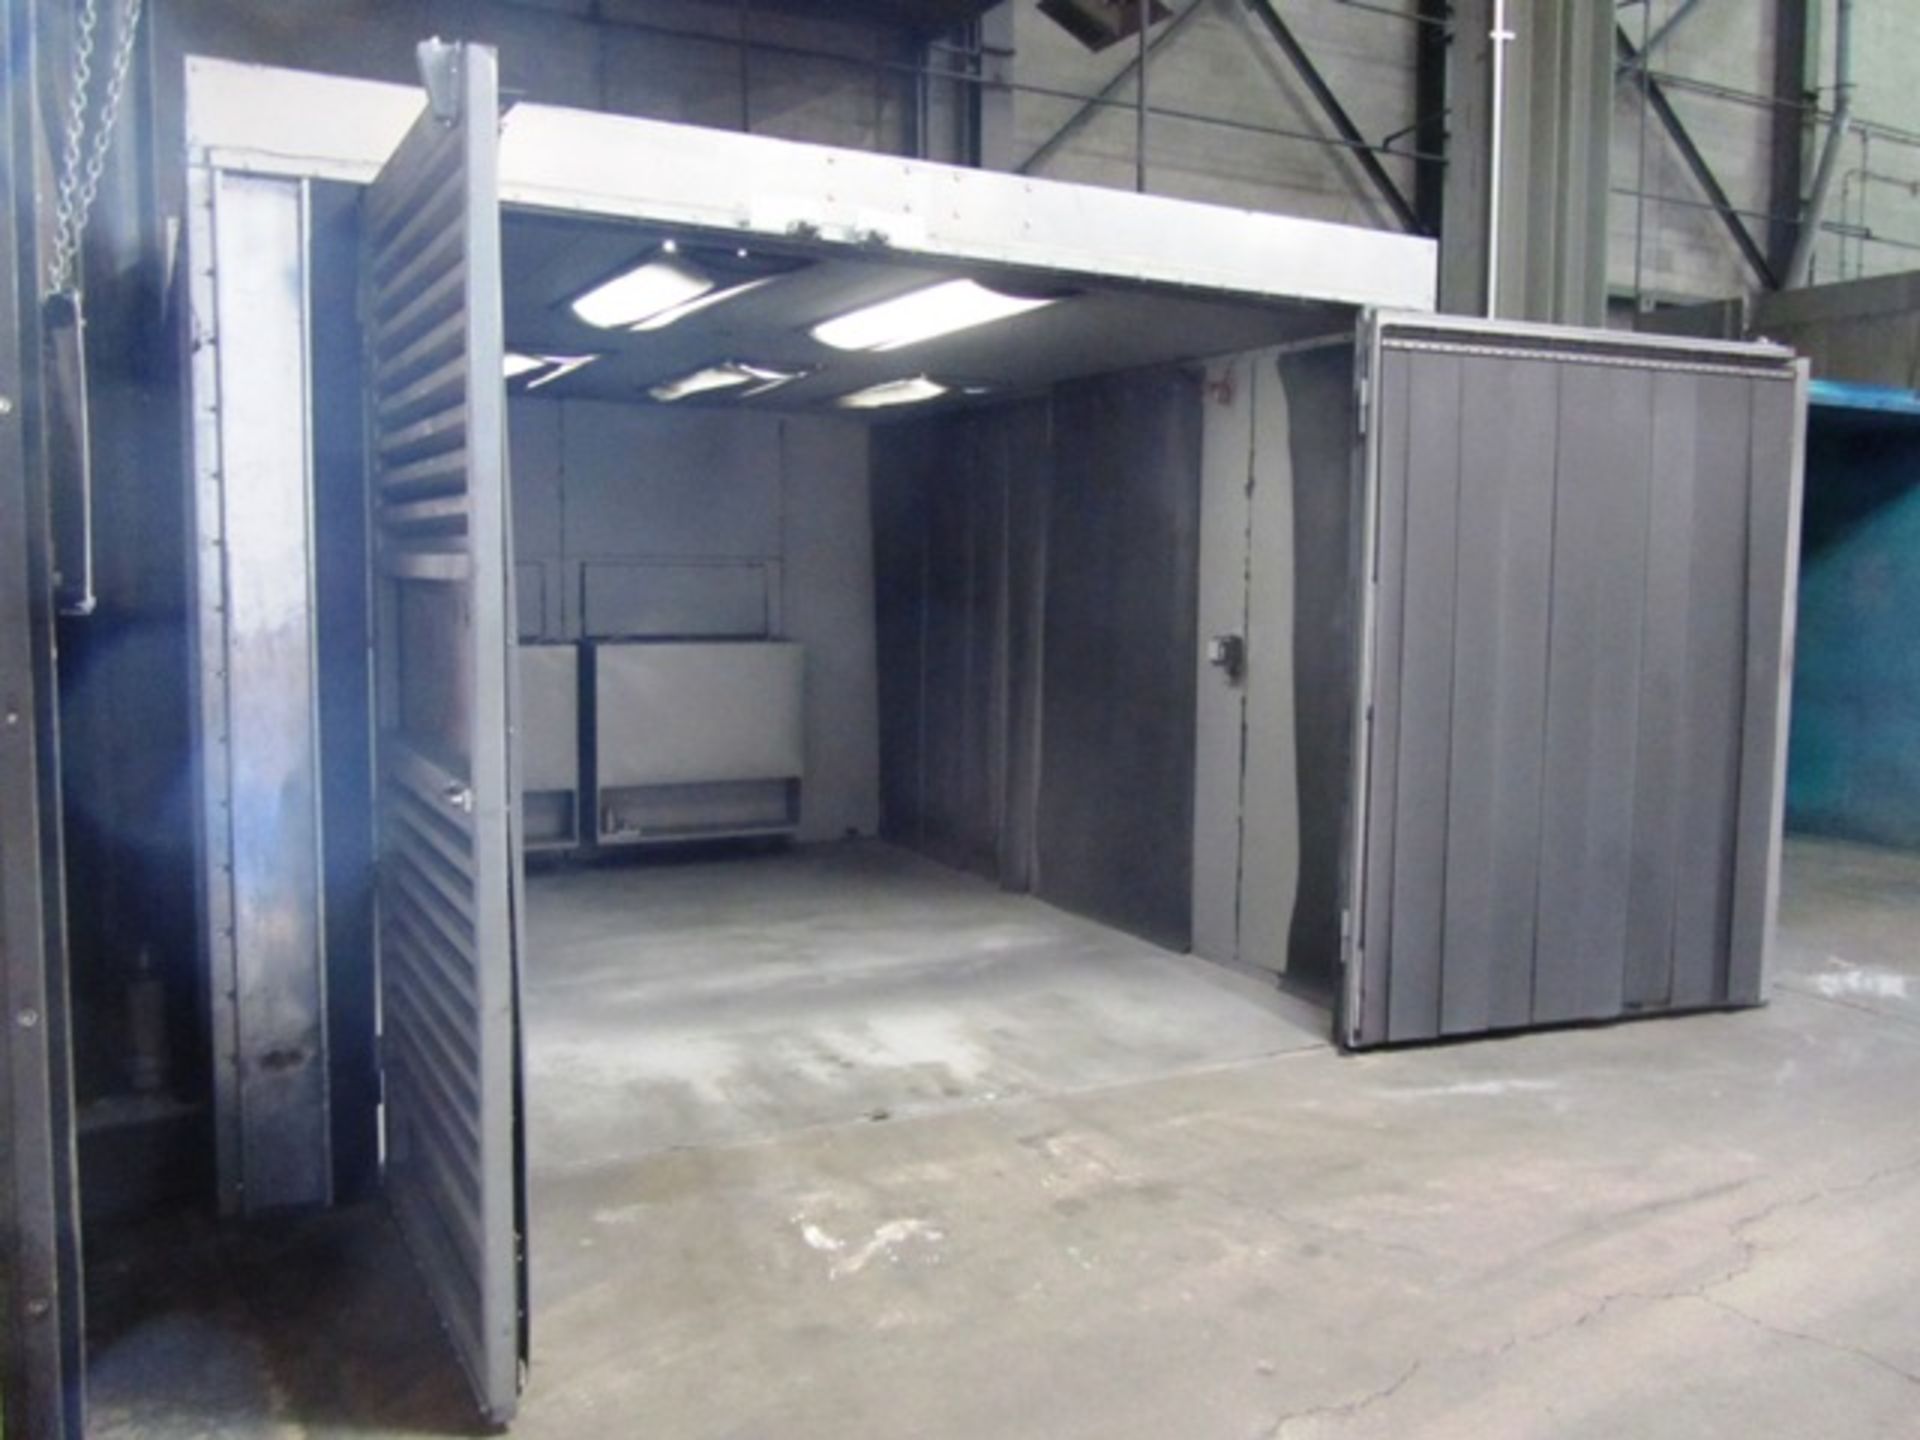 Global 14'D x 12'W x 8'H 2-Door Finishing Blast Booth with Lights, Start & Stop Push Button Control